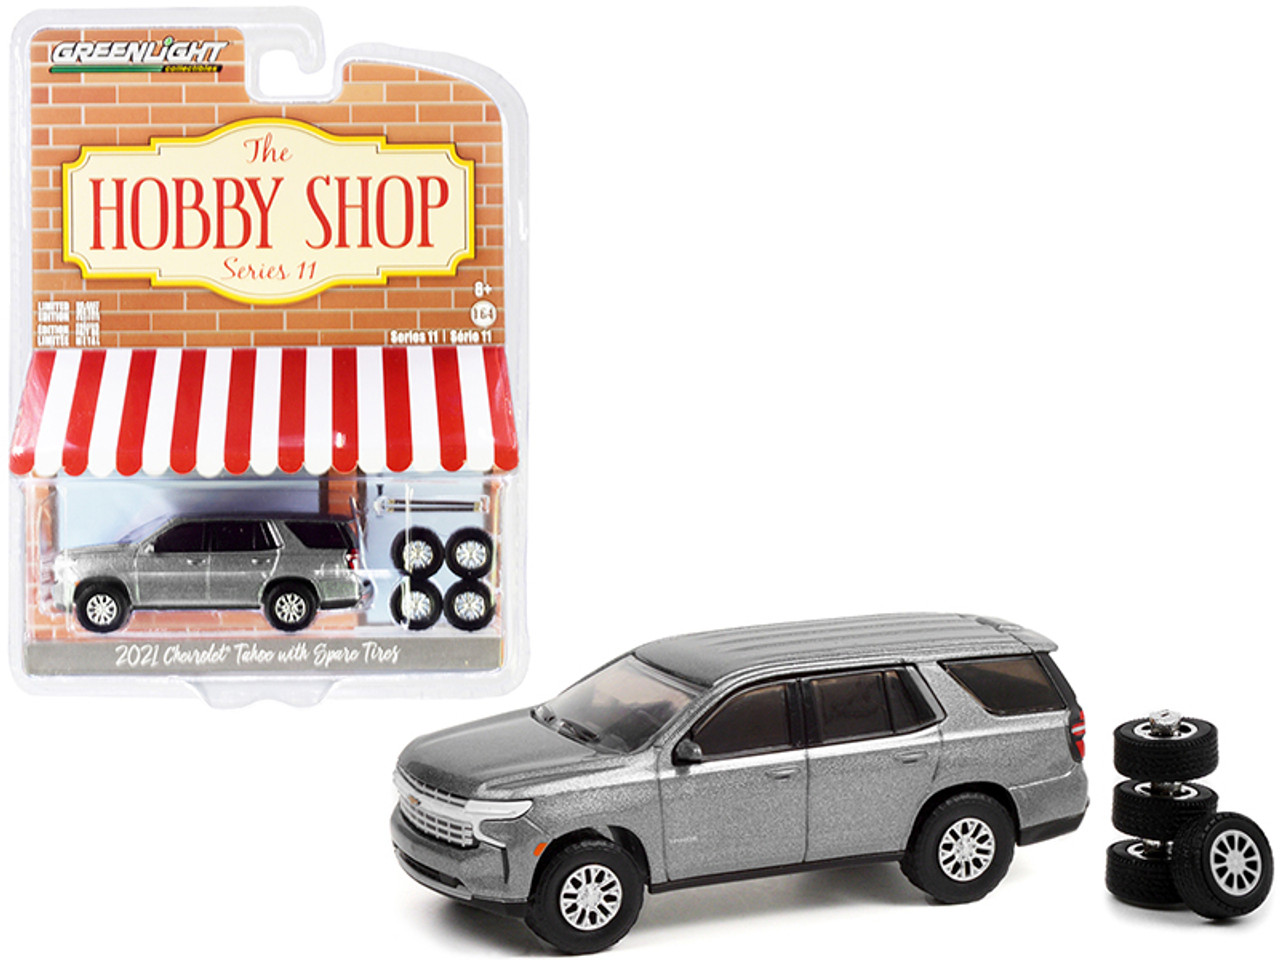 2021 Chevrolet Tahoe Satin Steel Gray Metallic with Spare Tires "The Hobby Shop" Series 11 1/64 Diecast Model Car by Greenlight